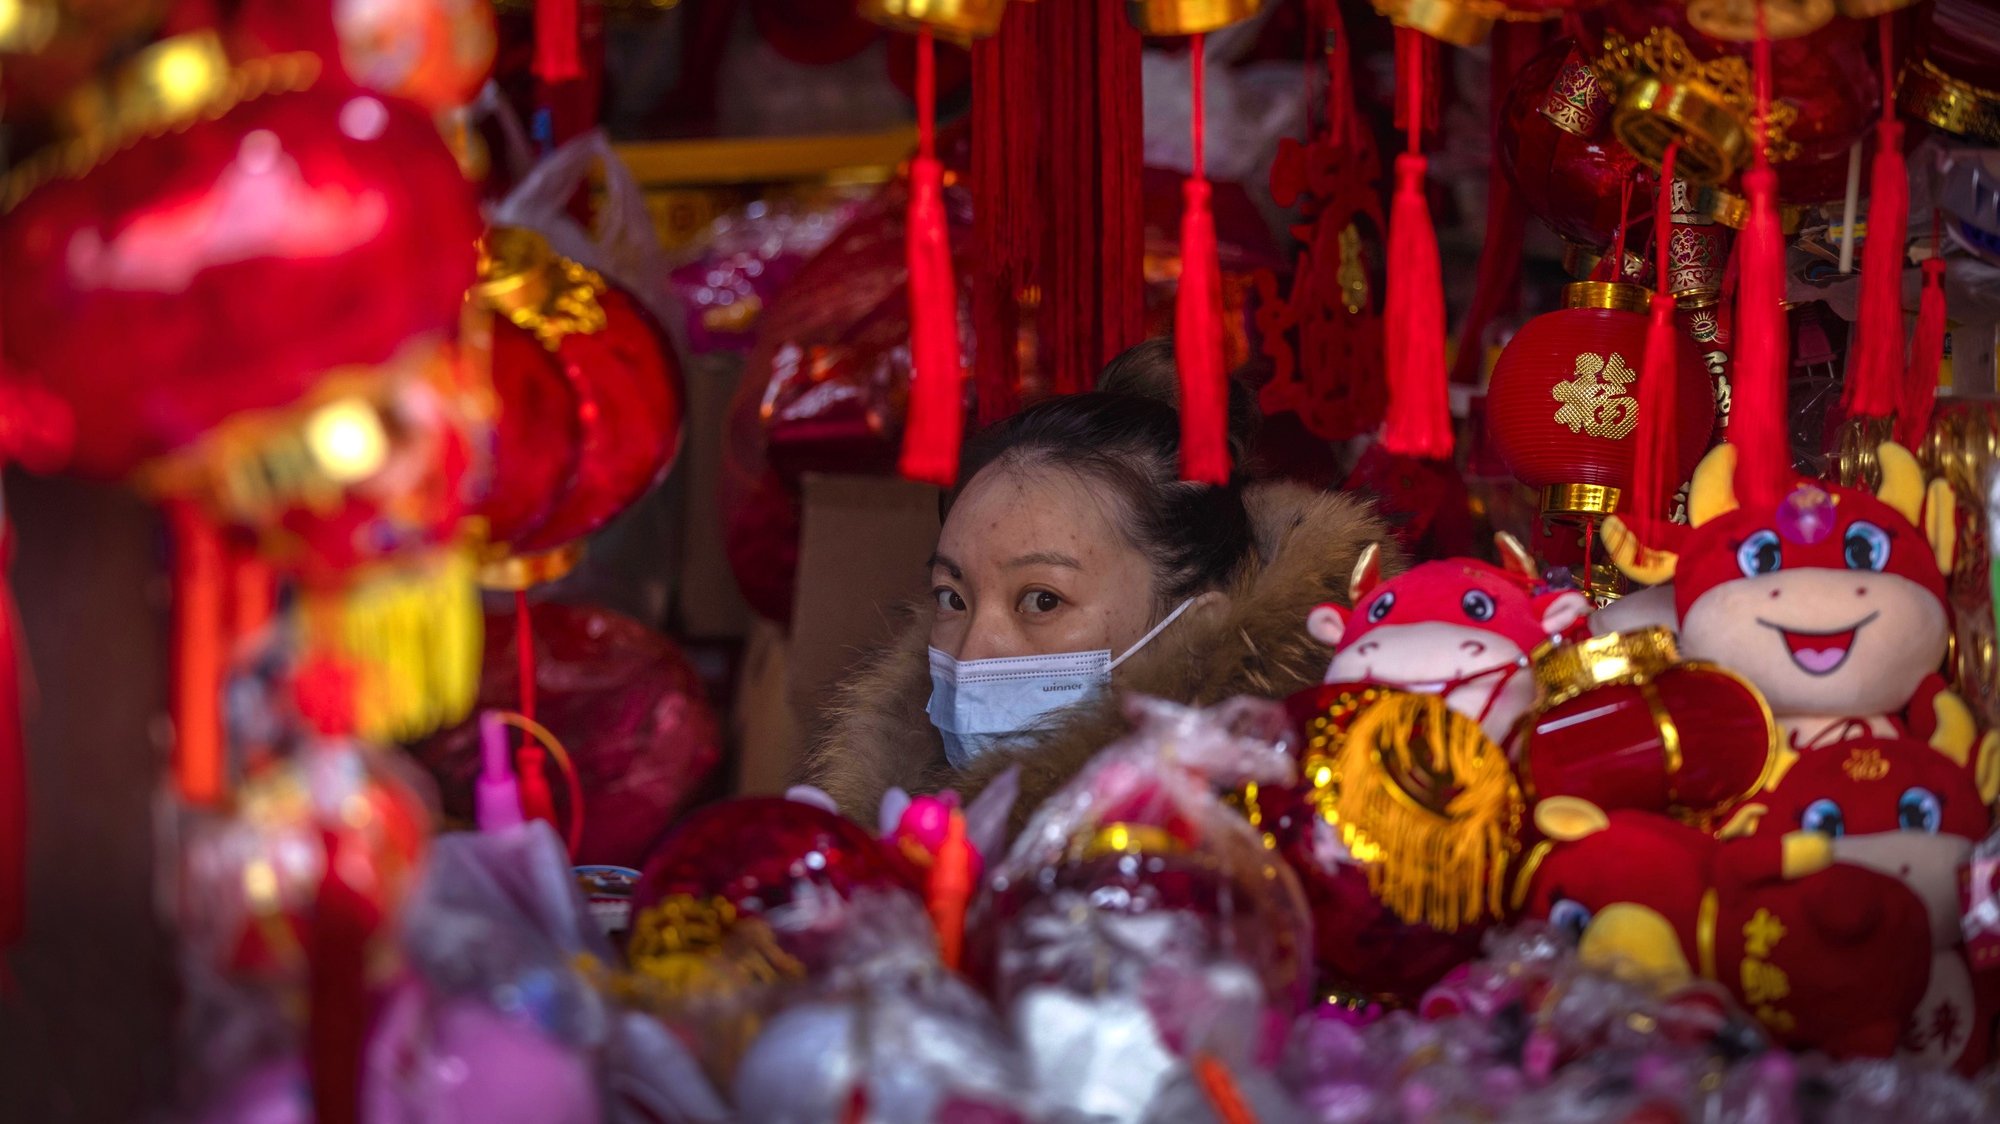 epa09014013 A woman offers lanterns and other Spring Festival decorations for sale in Shanghai, China, 15 February 2021. Tourist attractions, sports venues, movies, and other attractions in Shanghai are flooded with people who could not go back home to celebrate the Spring Festival due to the new outbreak of COVID-19 in China, government regulations, and travel restrictions. Usually Spring Festival lasts 16 days, starting from Chinese New Yearâ€™s eve to the Lantern Festival, and this year it is from 11. February to 26. February.  EPA/ALEX PLAVEVSKI